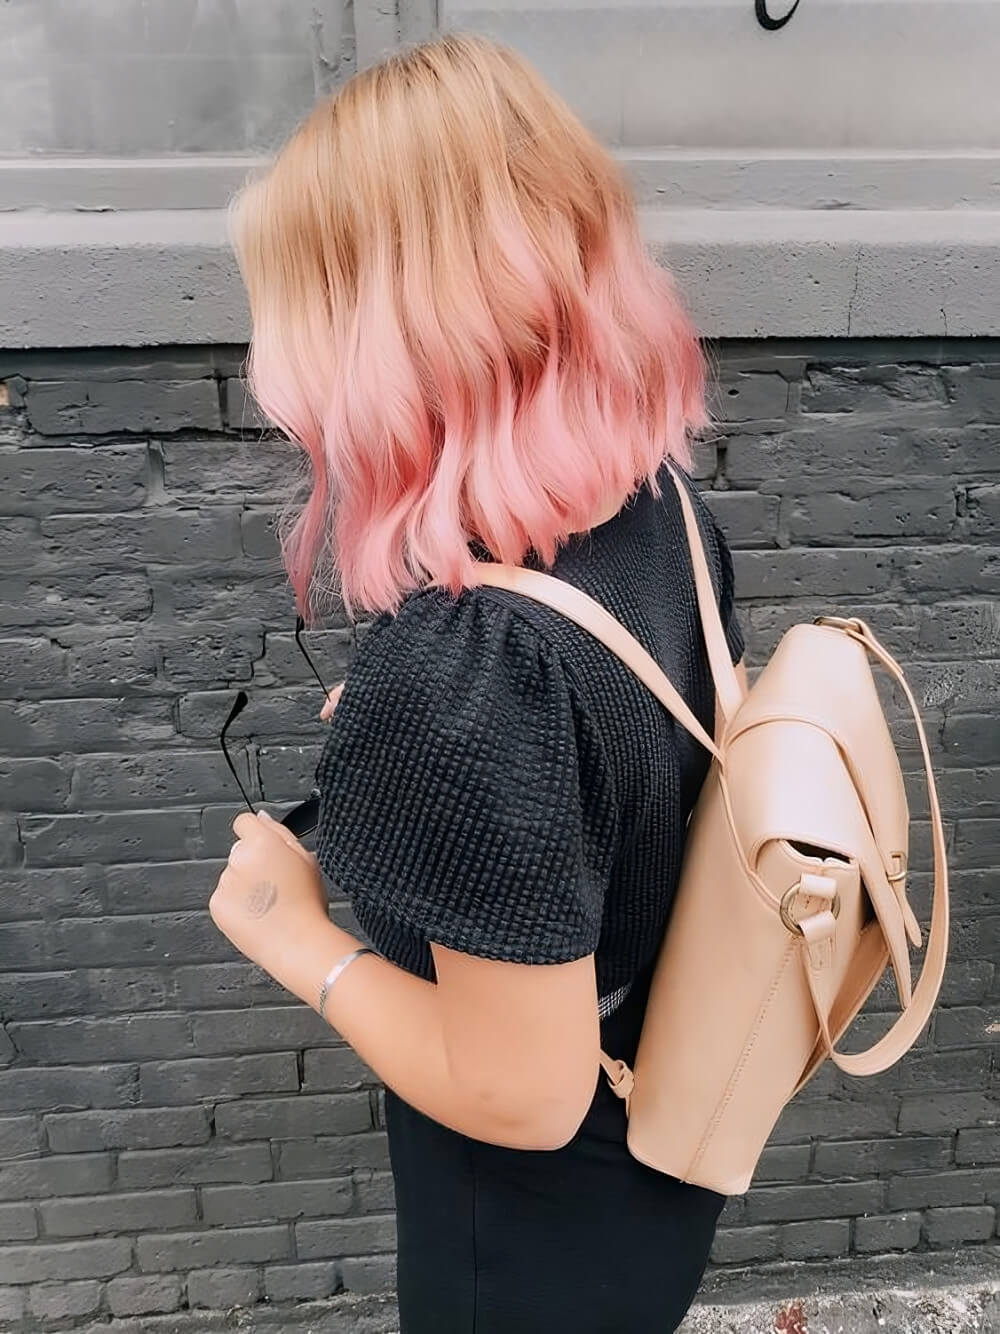 30 Cool Pastel Hair Colors Every Girl Loves - 195